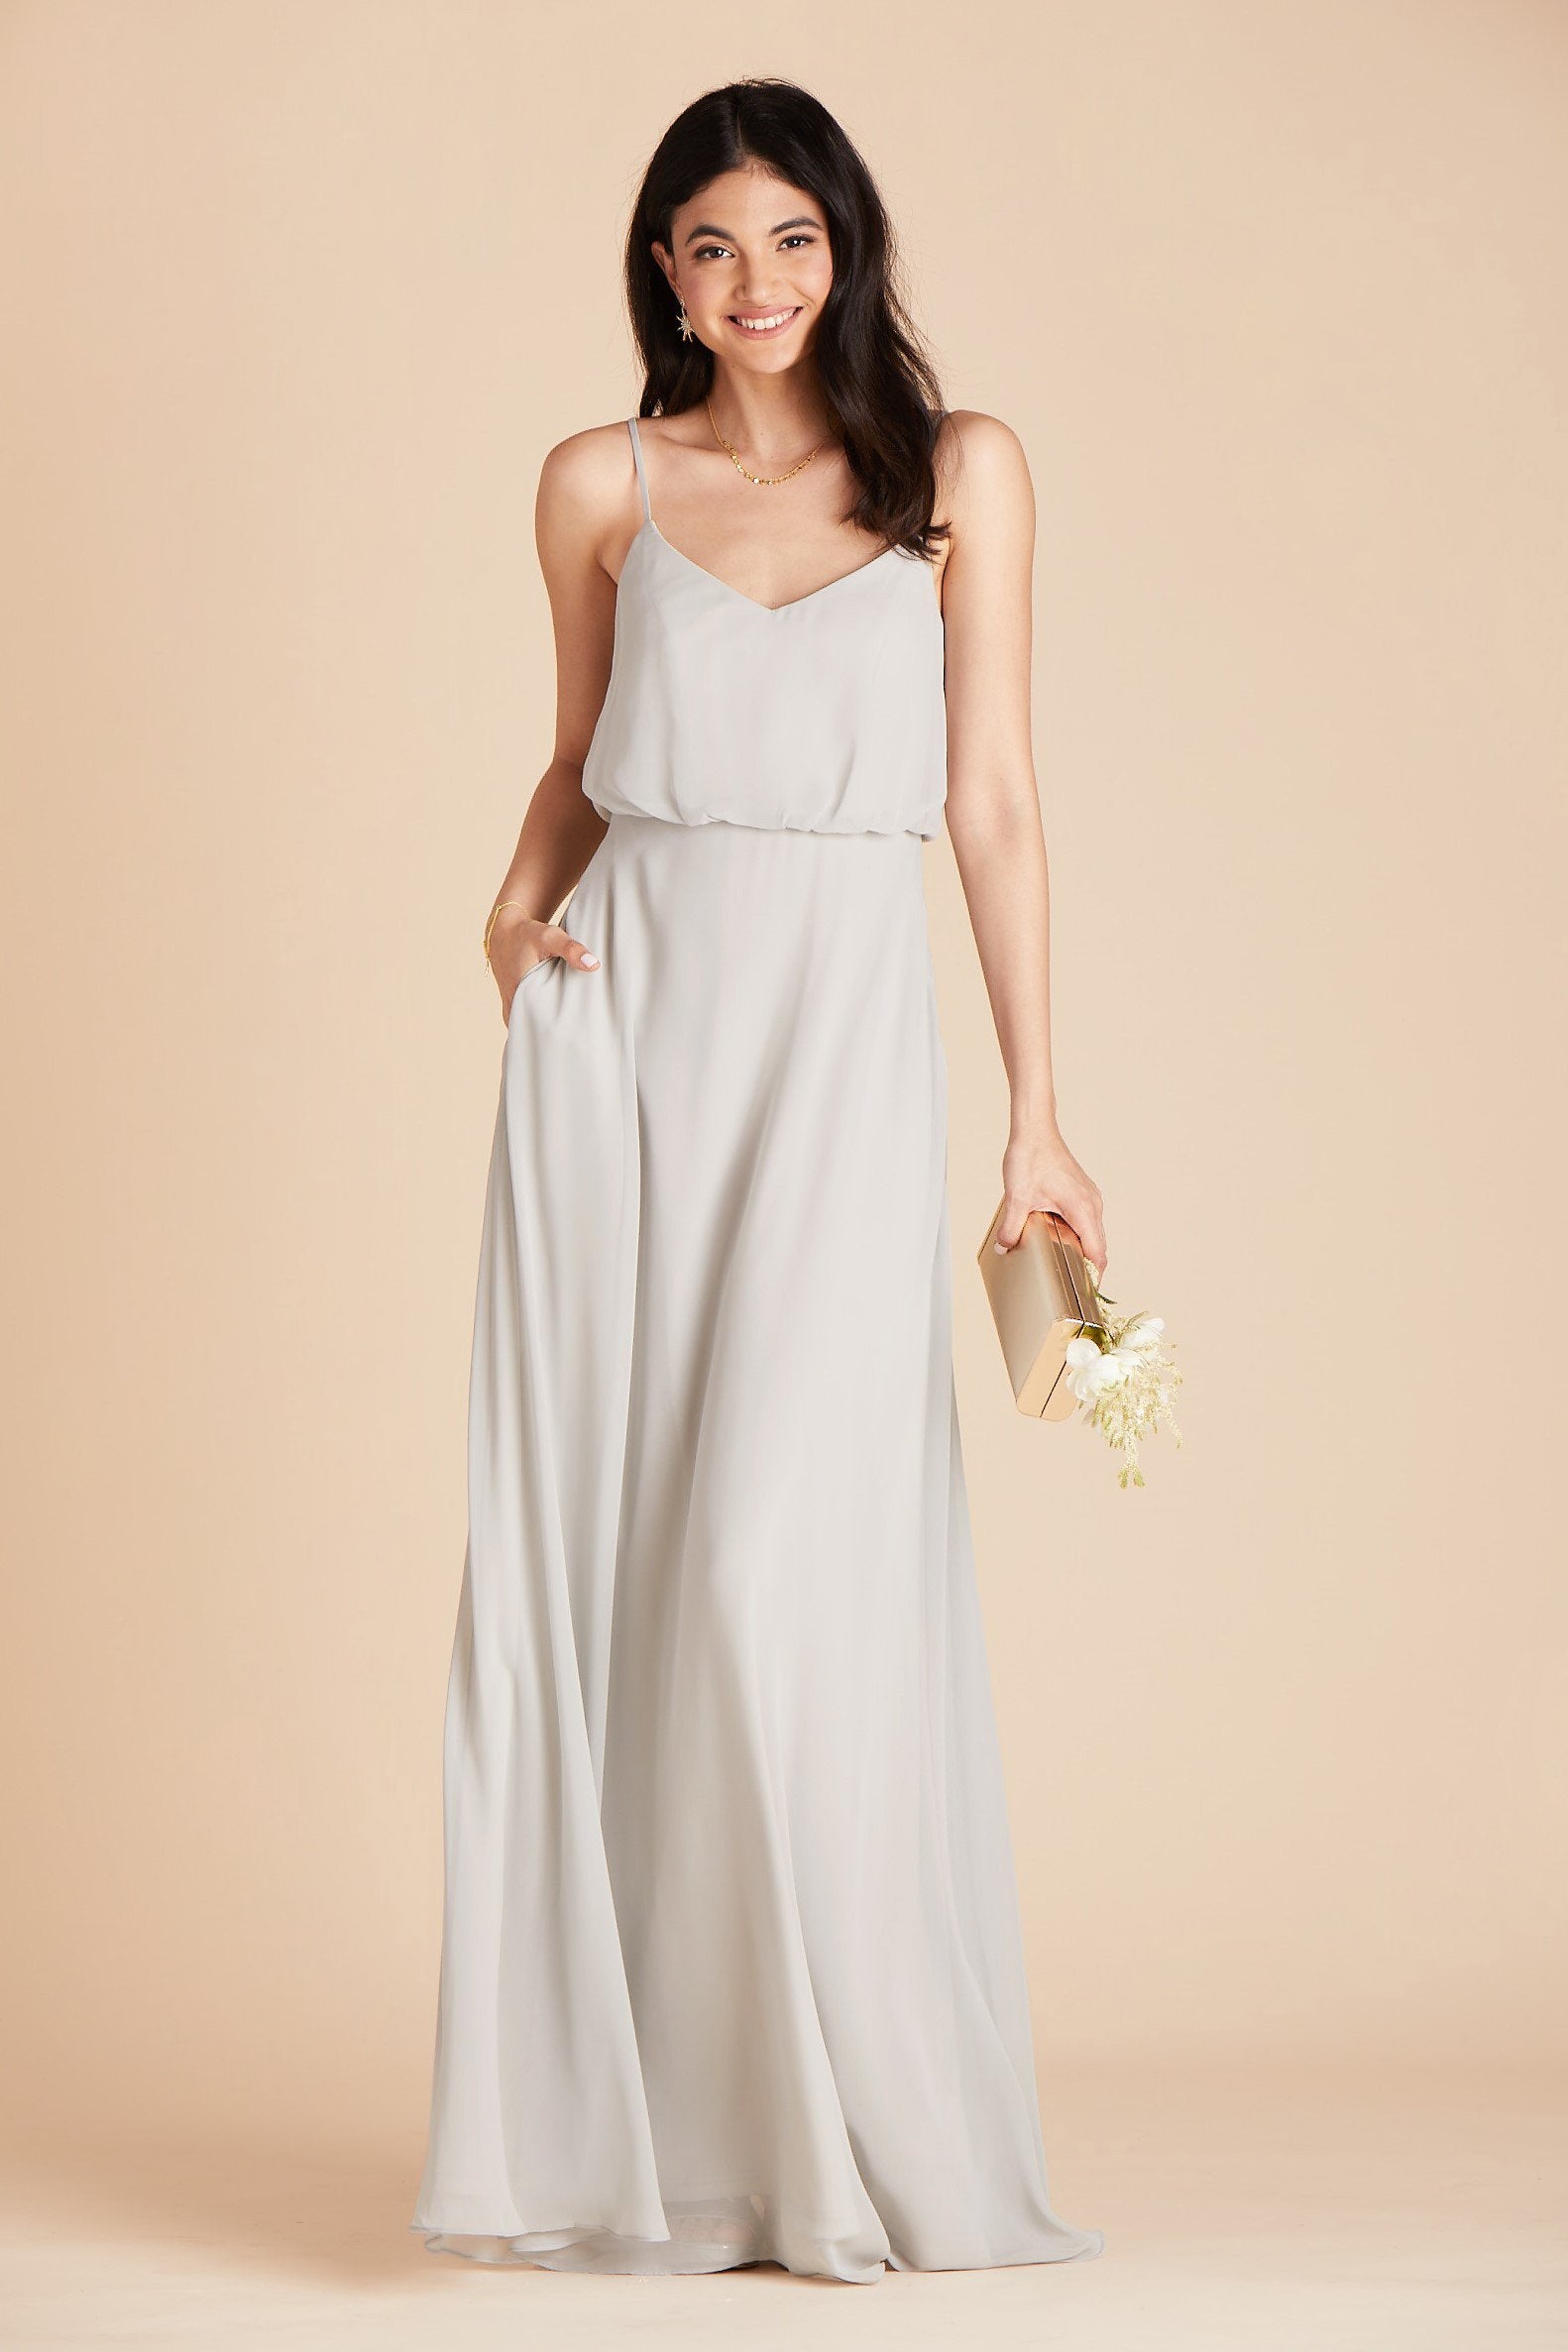 Gwennie bridesmaid dress in dove gray chiffon by Birdy Grey, front view with hand in pocket